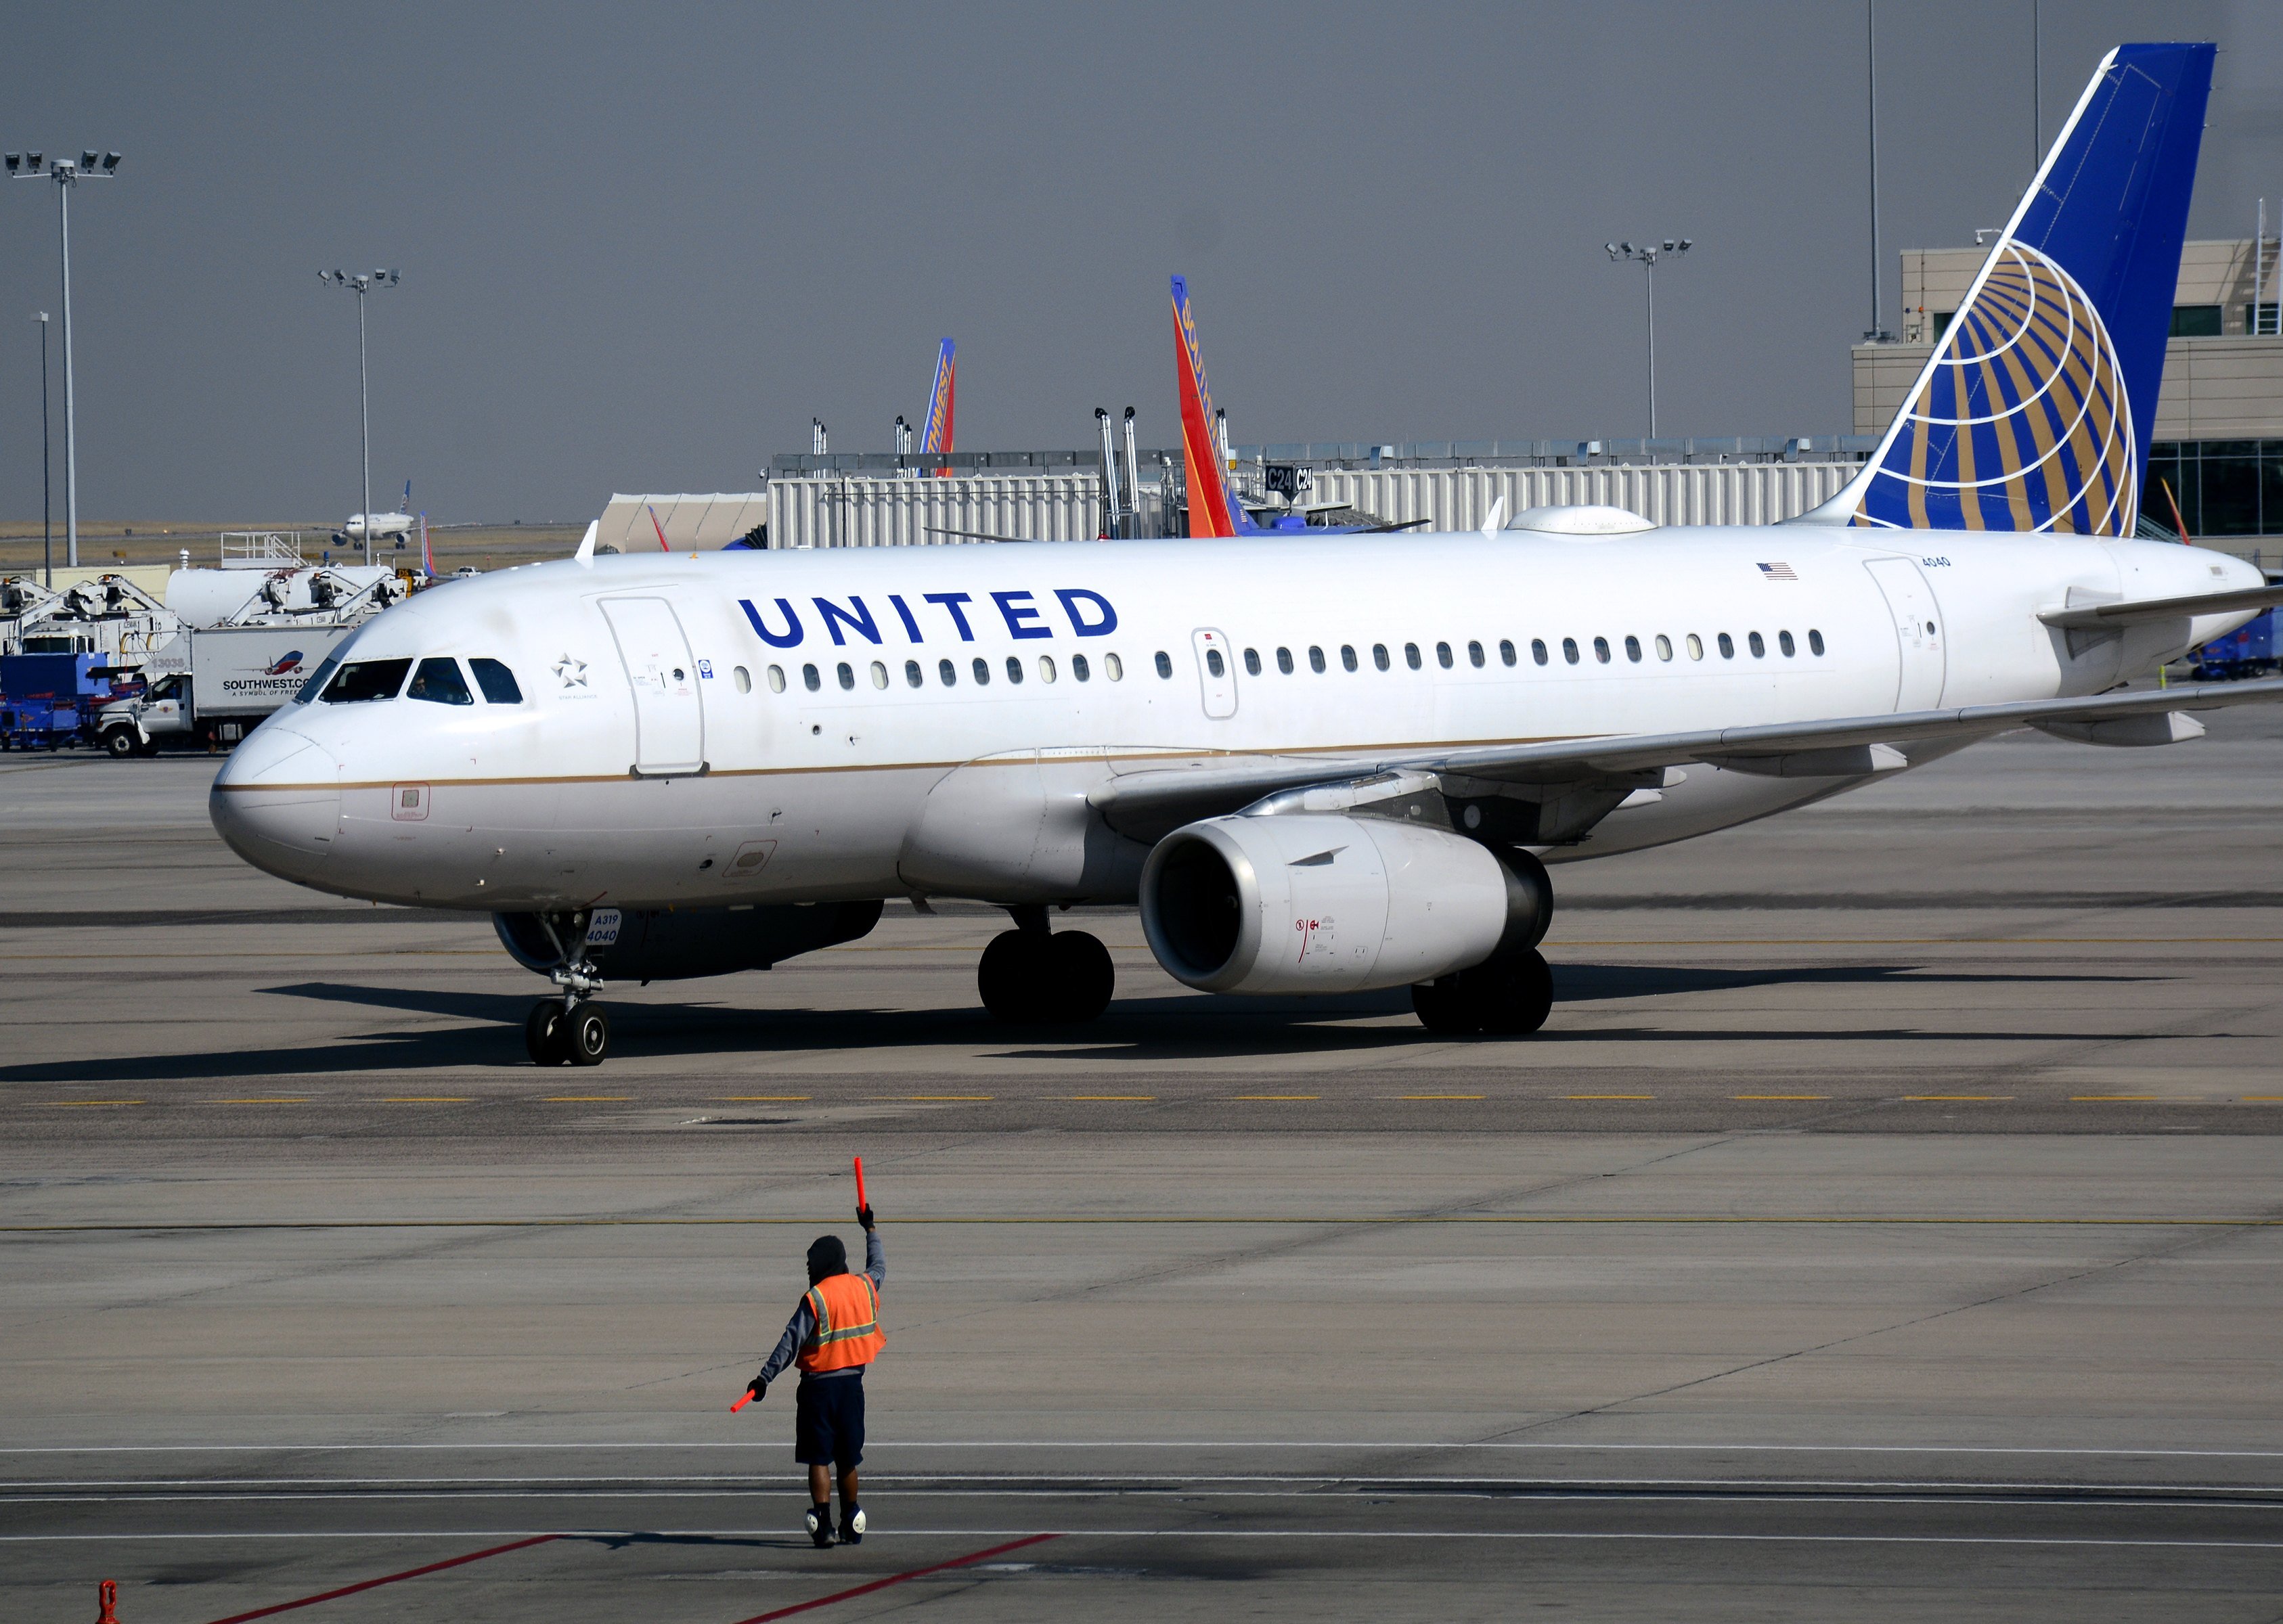 DENVER, CO - August 25, 2016: A United Airlines Airbus A319 passenger plane taxis toward a gate at Denver International Airport in Denver, Colorado. (Photo by Robert Alexander/Getty Images)